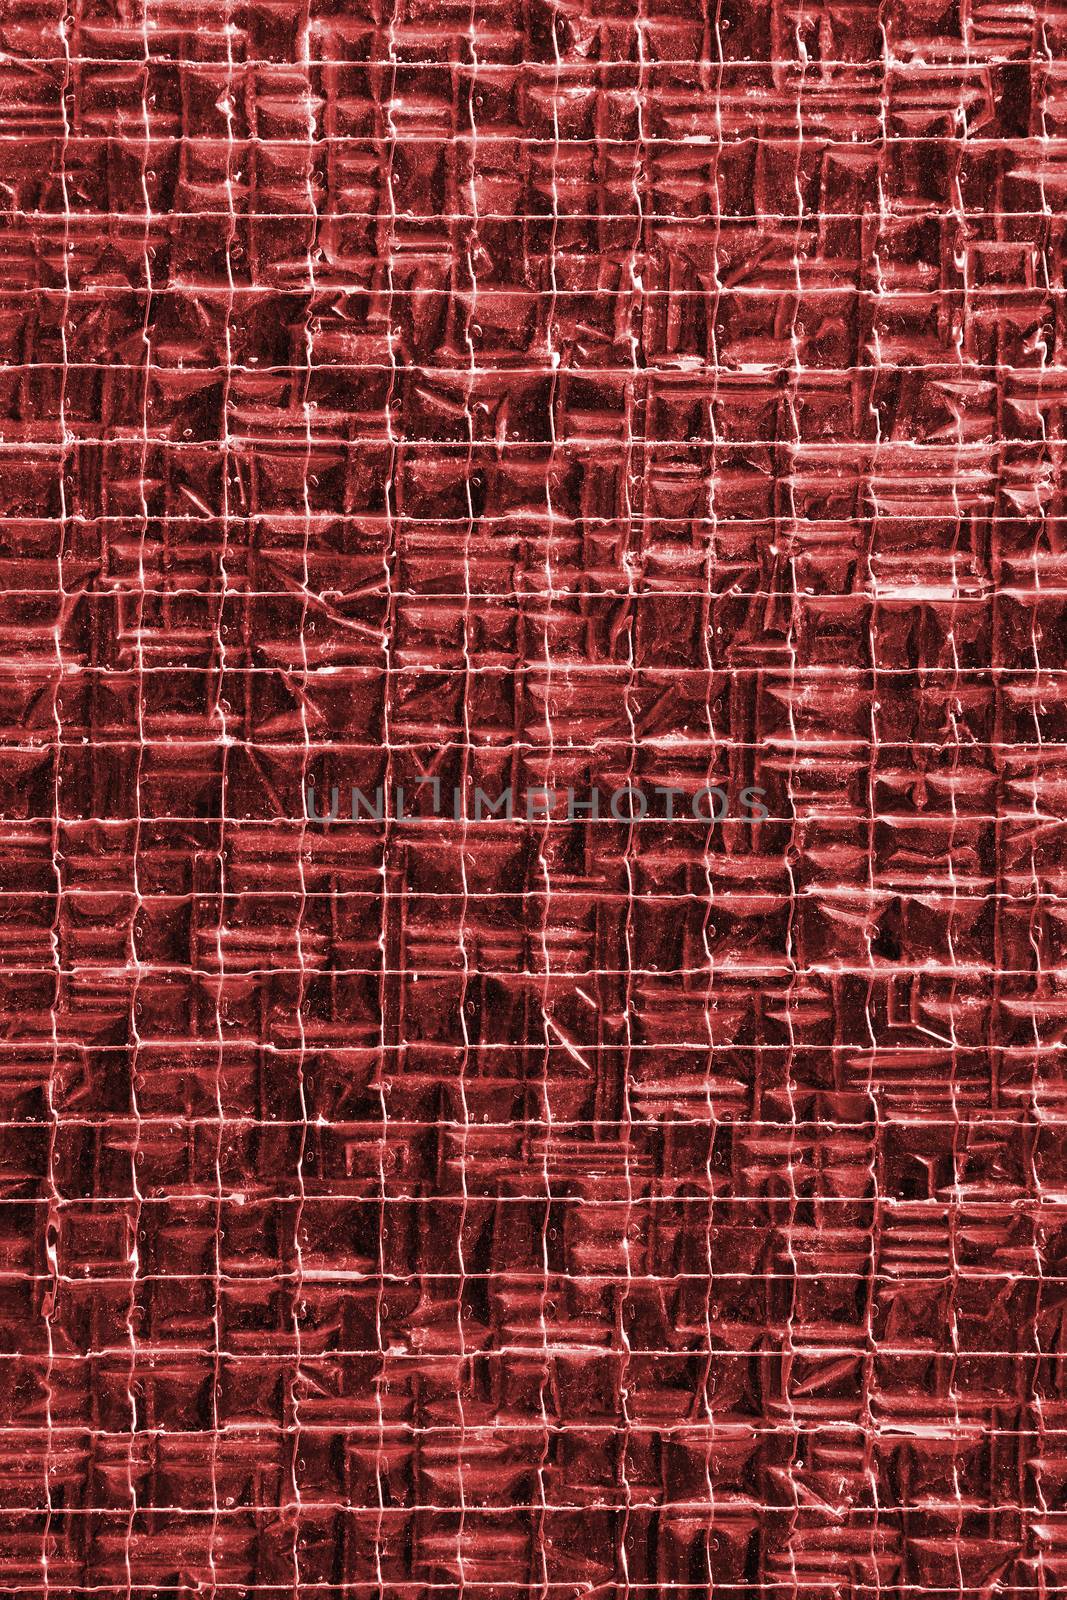 Background texture of red stained glass reinforced with metal wire mesh grid, close up